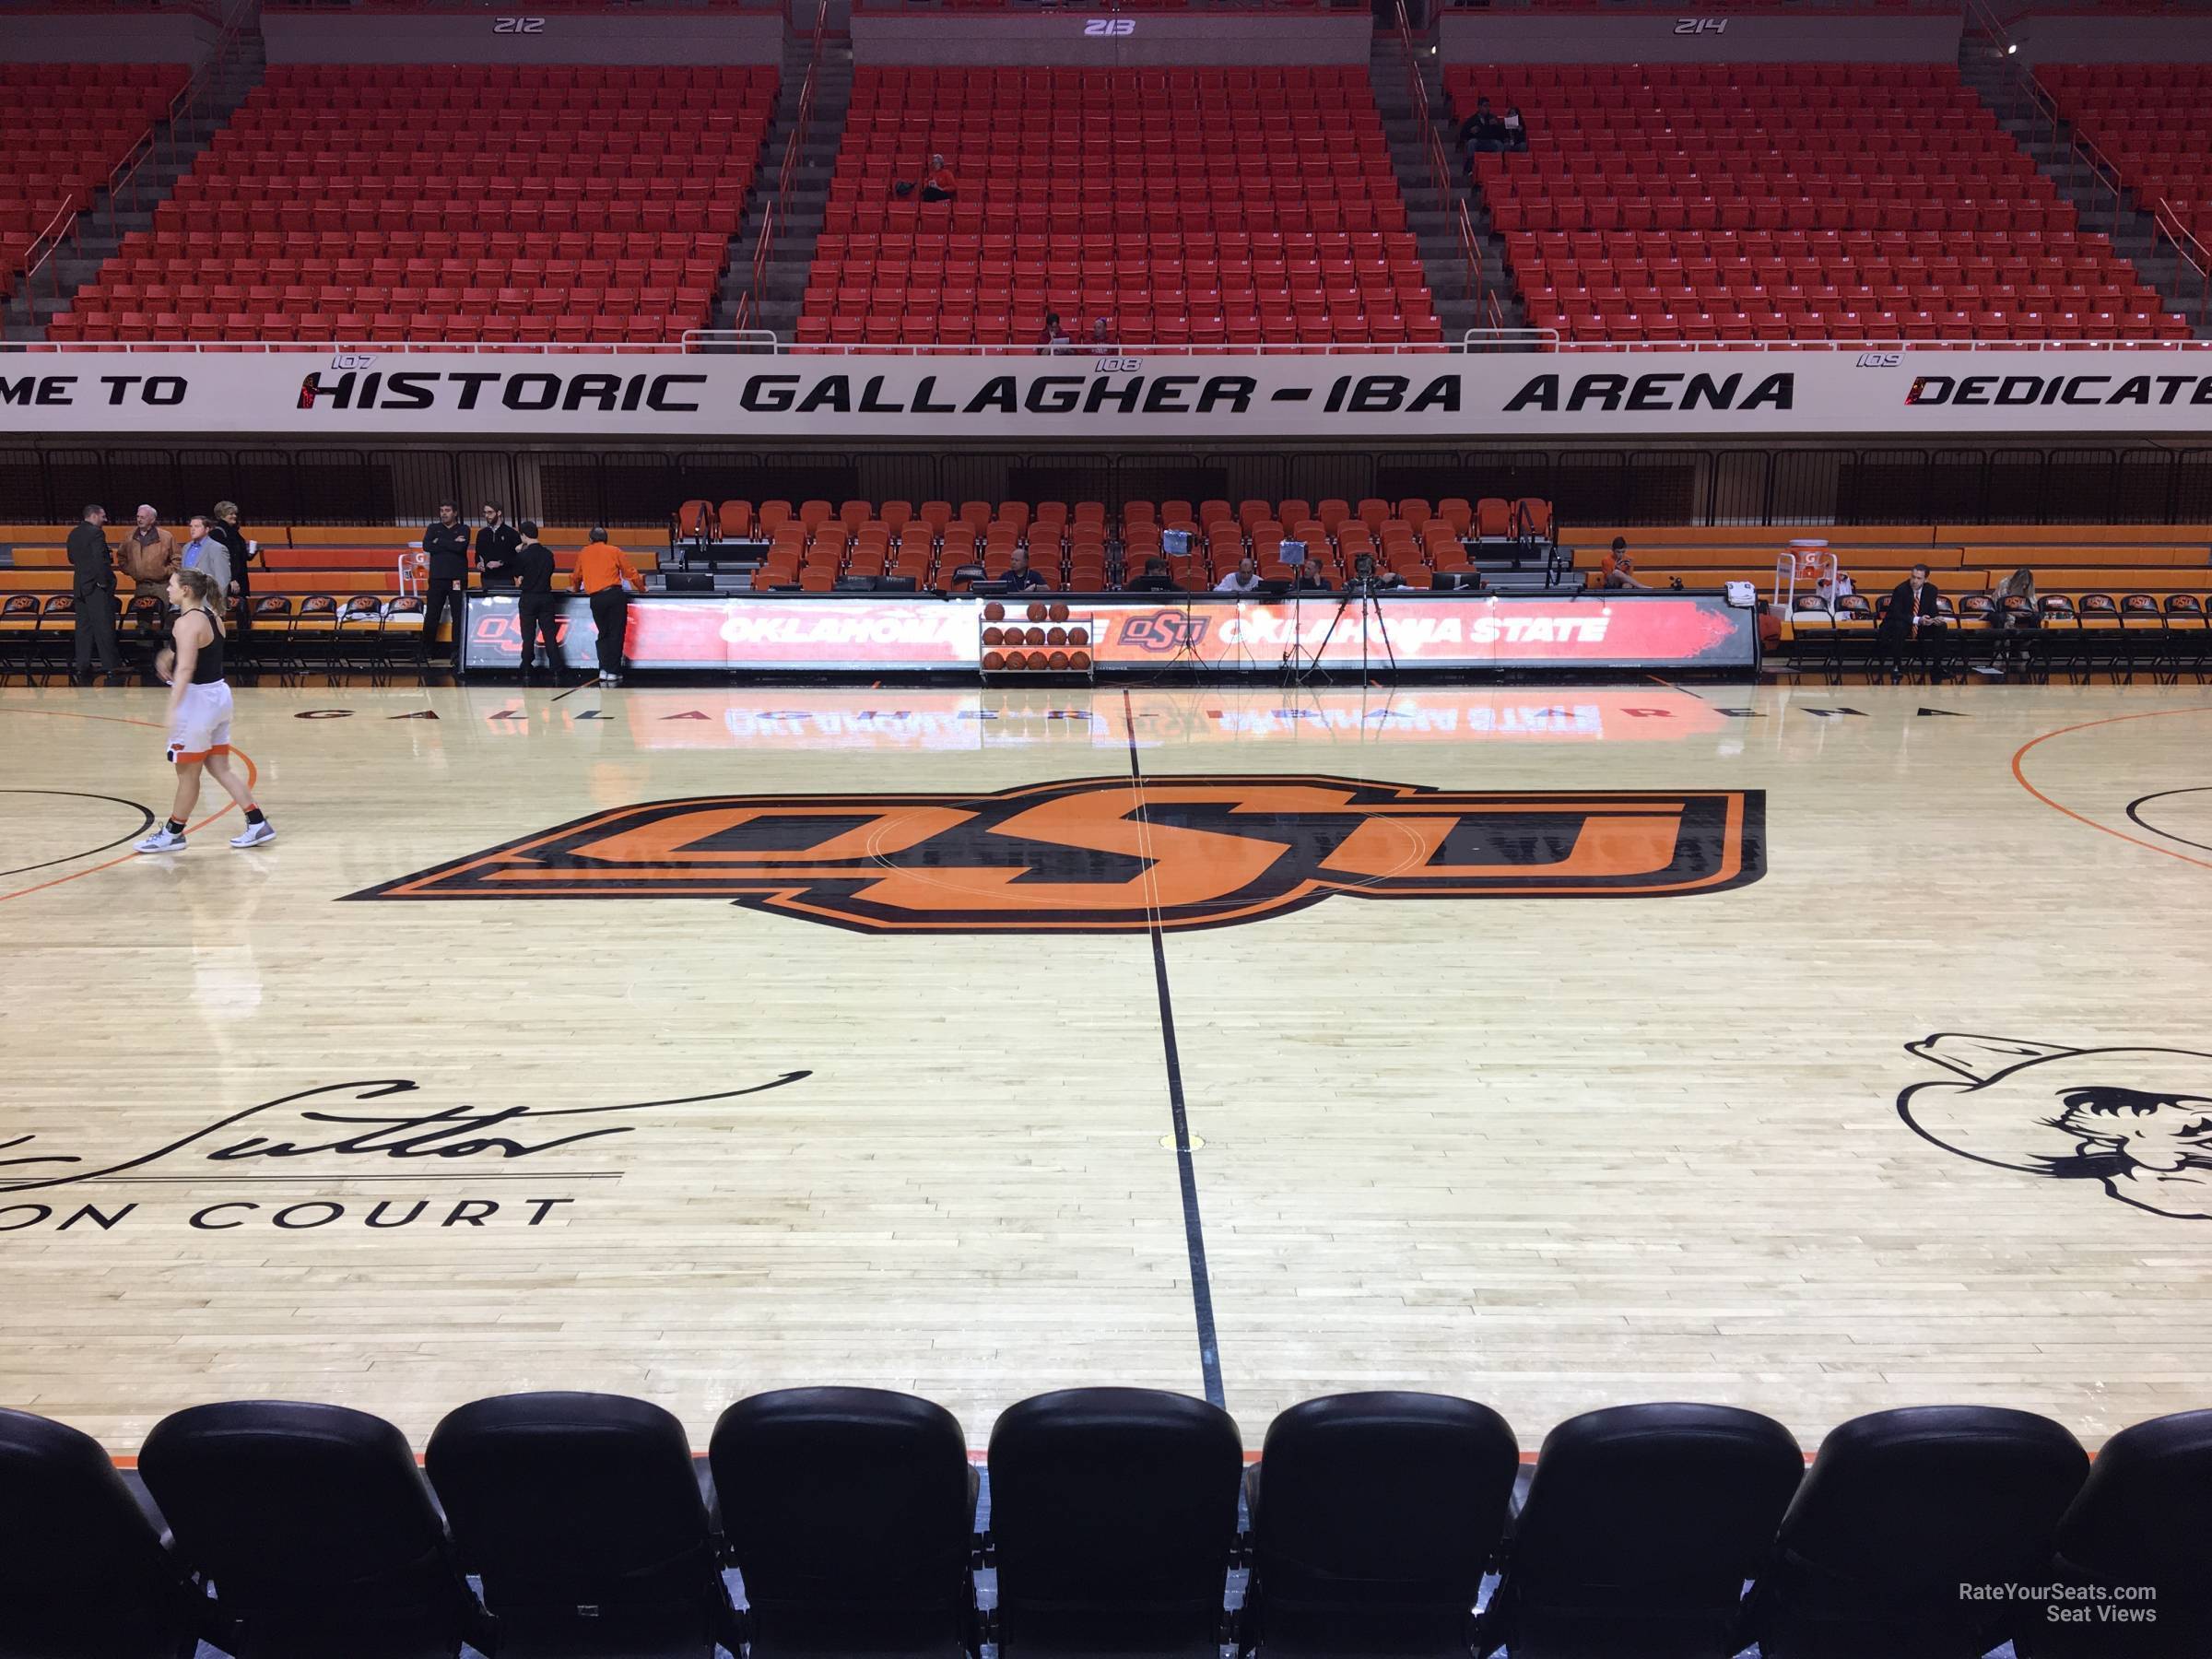 section 102, row 3 seat view  - gallagher-iba arena